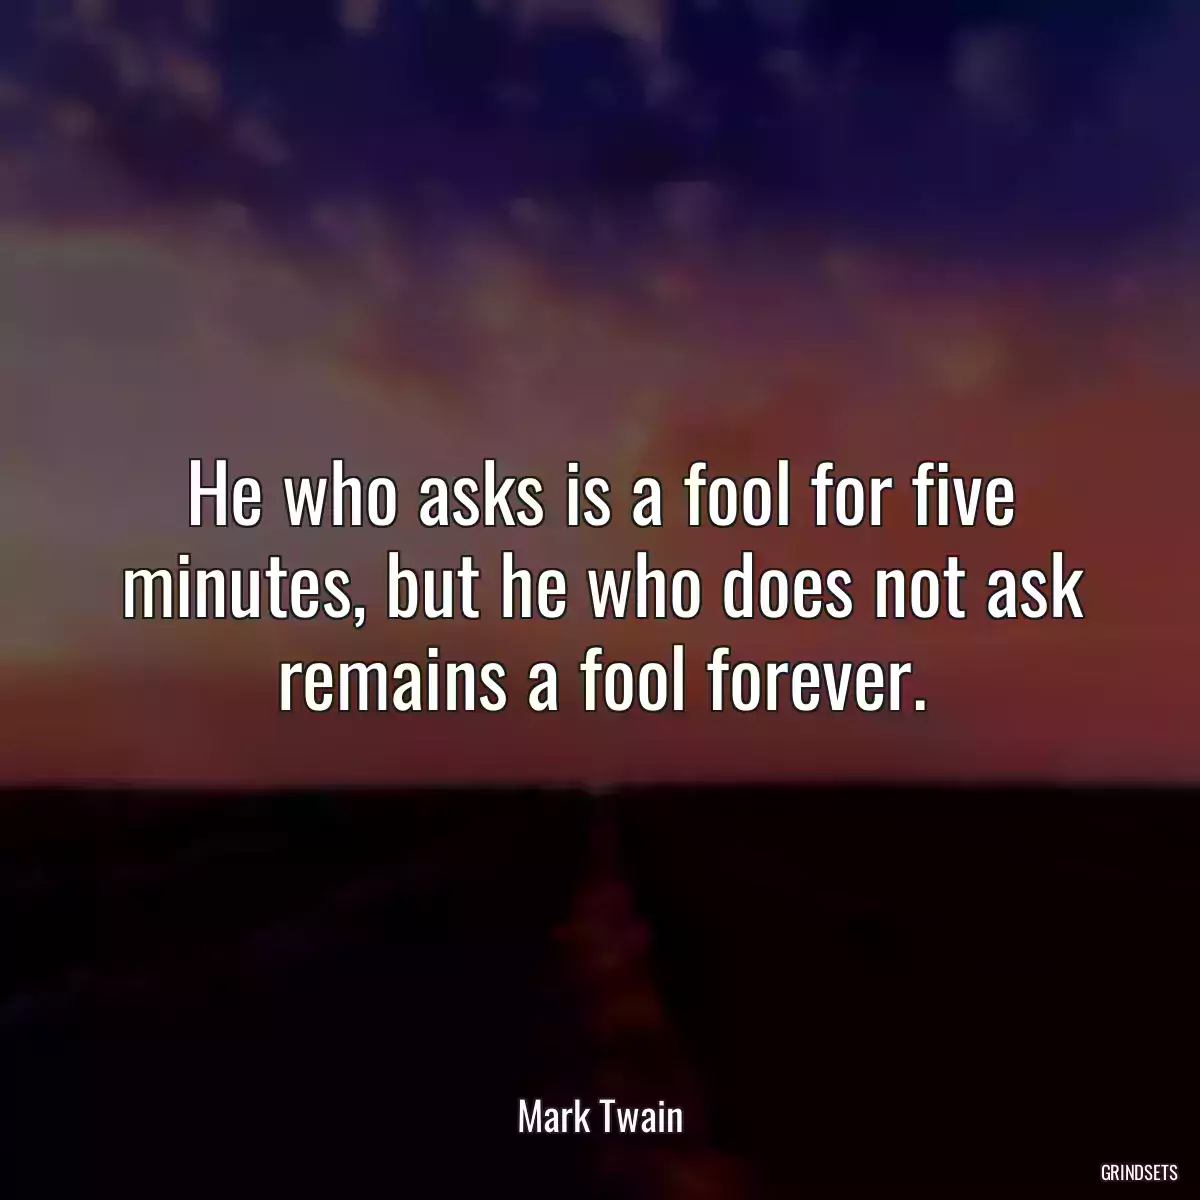 He who asks is a fool for five minutes, but he who does not ask remains a fool forever.